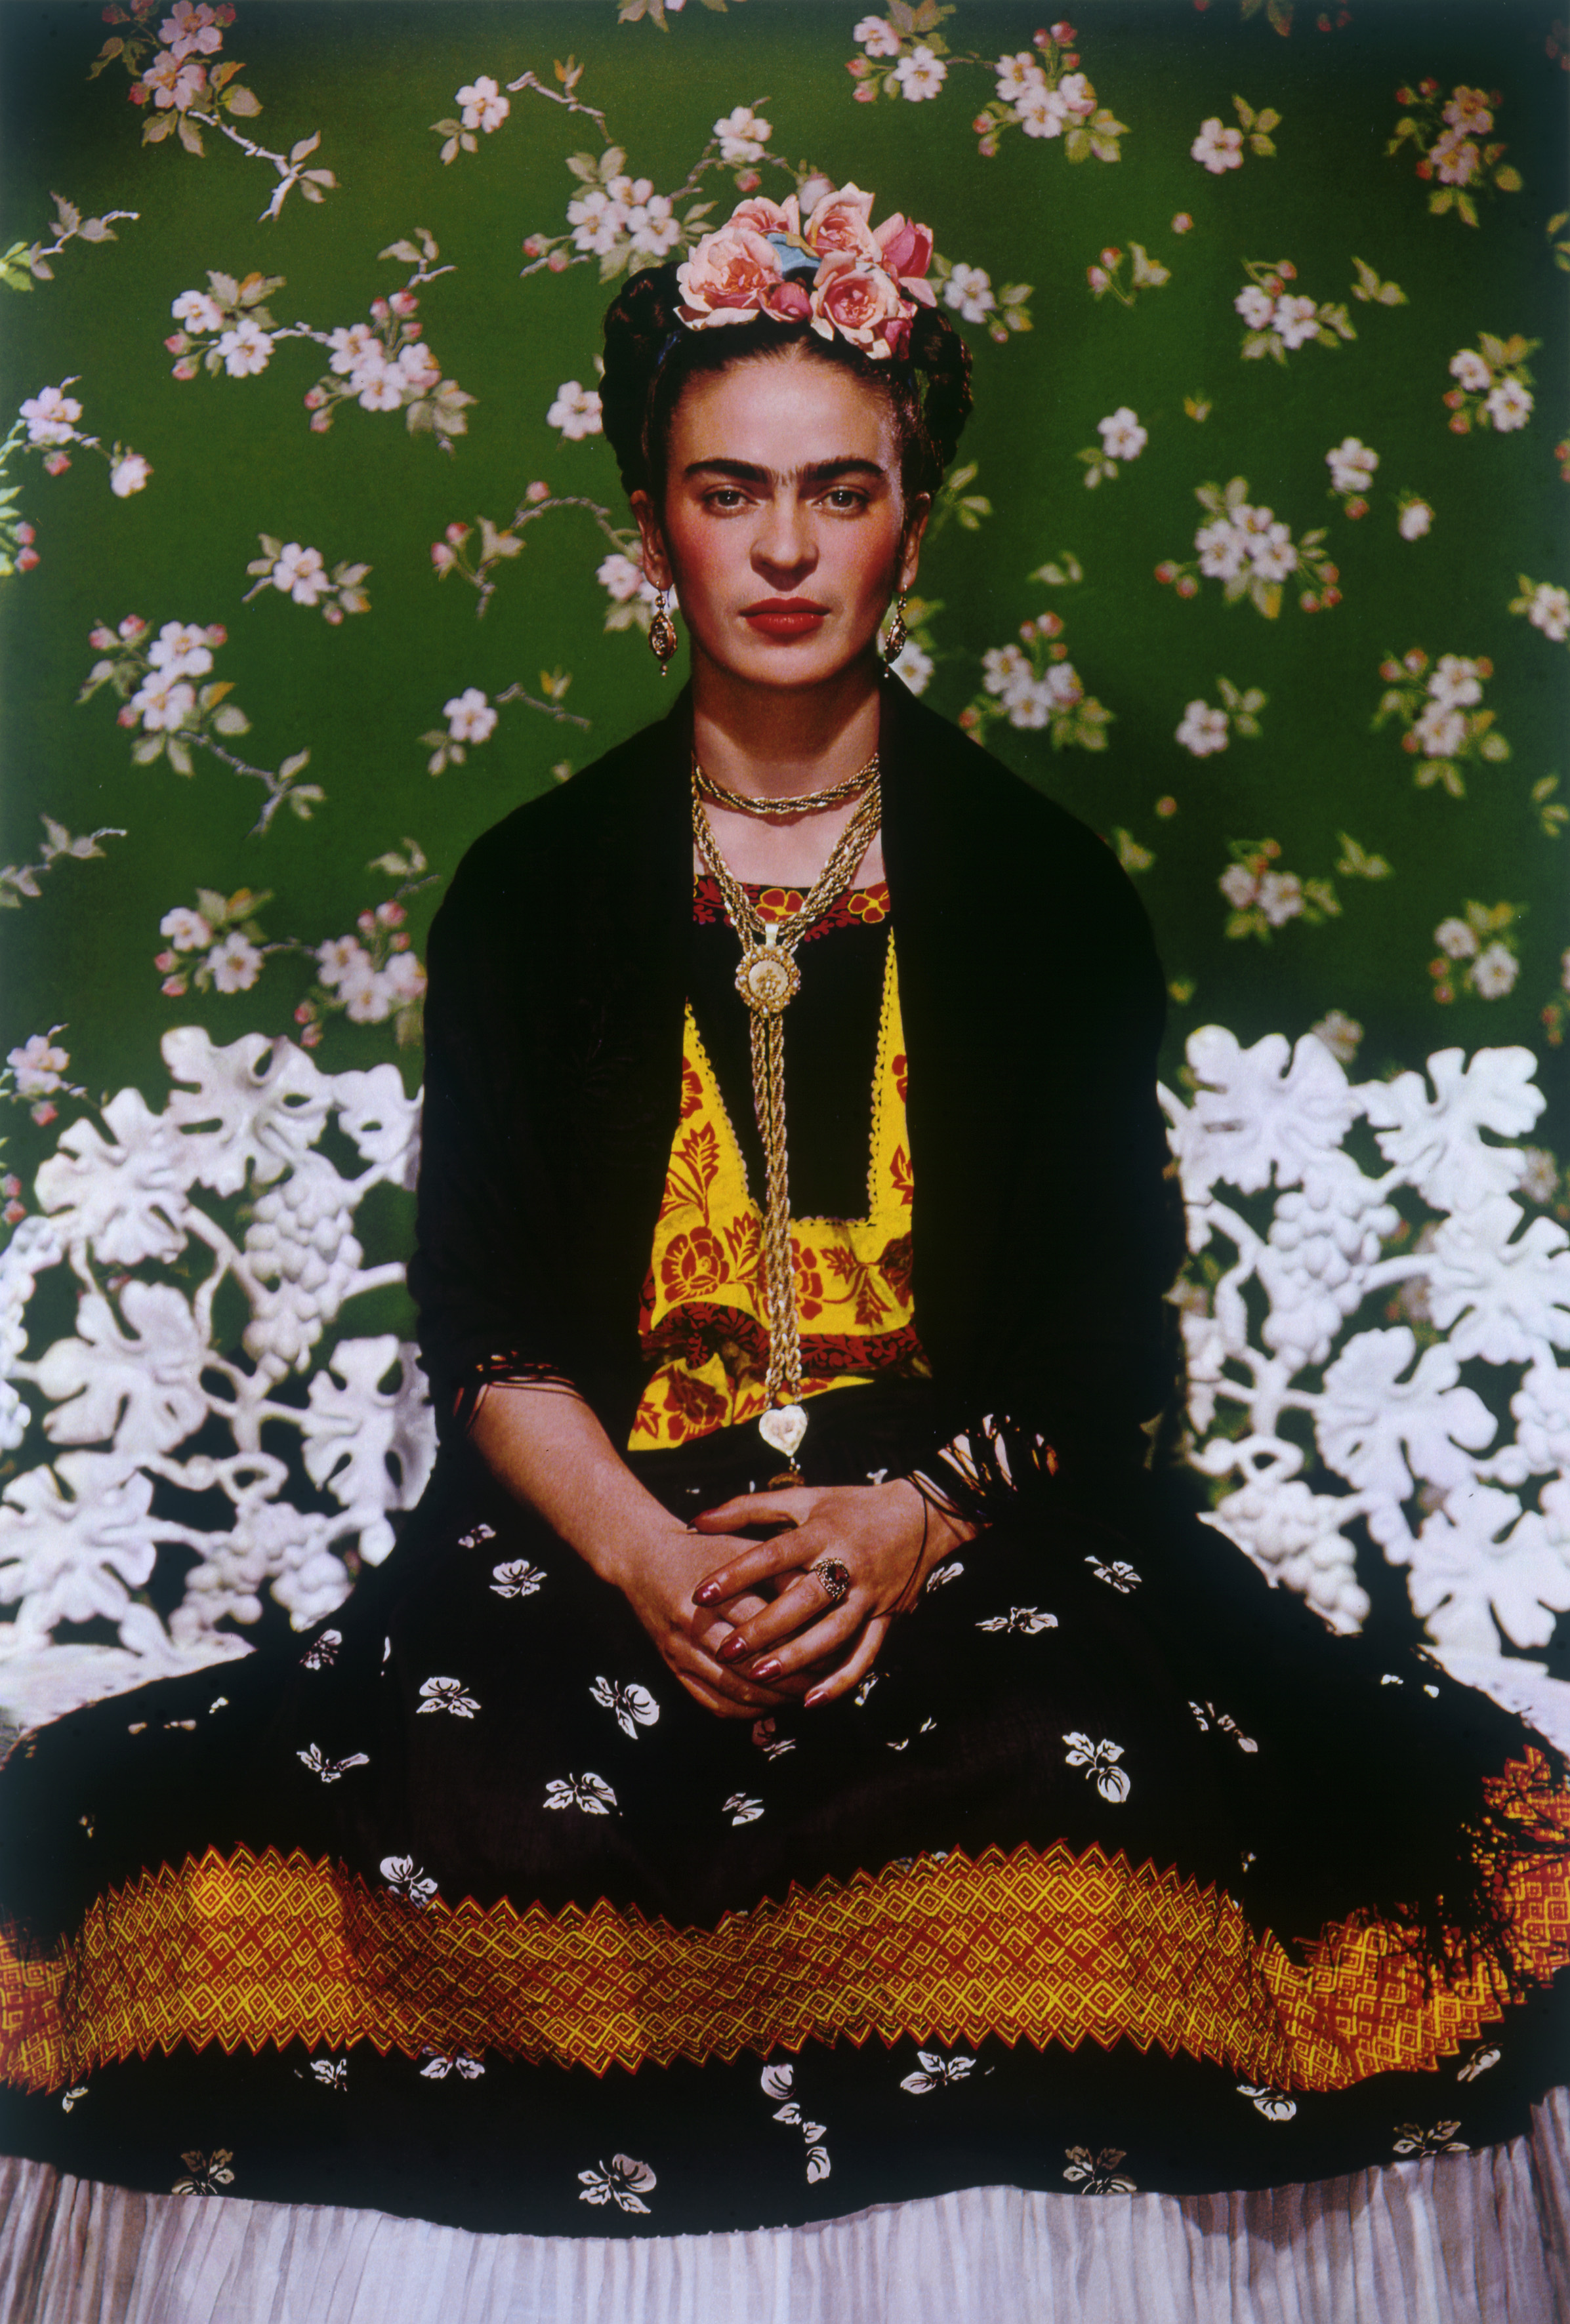 <p><strong>Nickolas Muray</strong> <em>Frida Kahlo on Bench #5</em> 1939. The Jacques and Natasha Gelman Collection of 20th Century Mexican Art and the Vergel Foundation. &copy; Nickolas Muray Photo Archives&nbsp;</p>